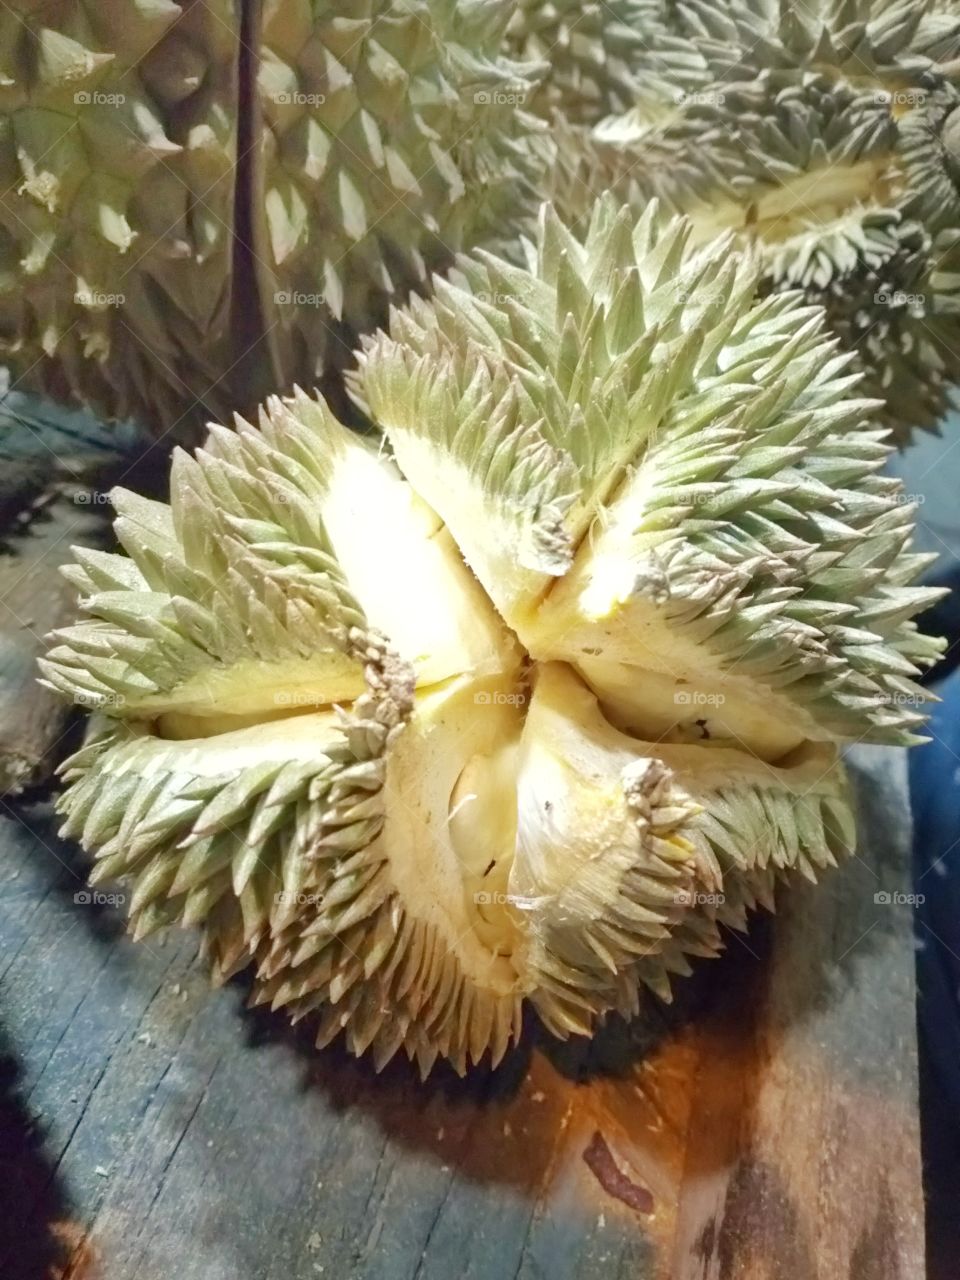 Durian has thorns placed on the floor.